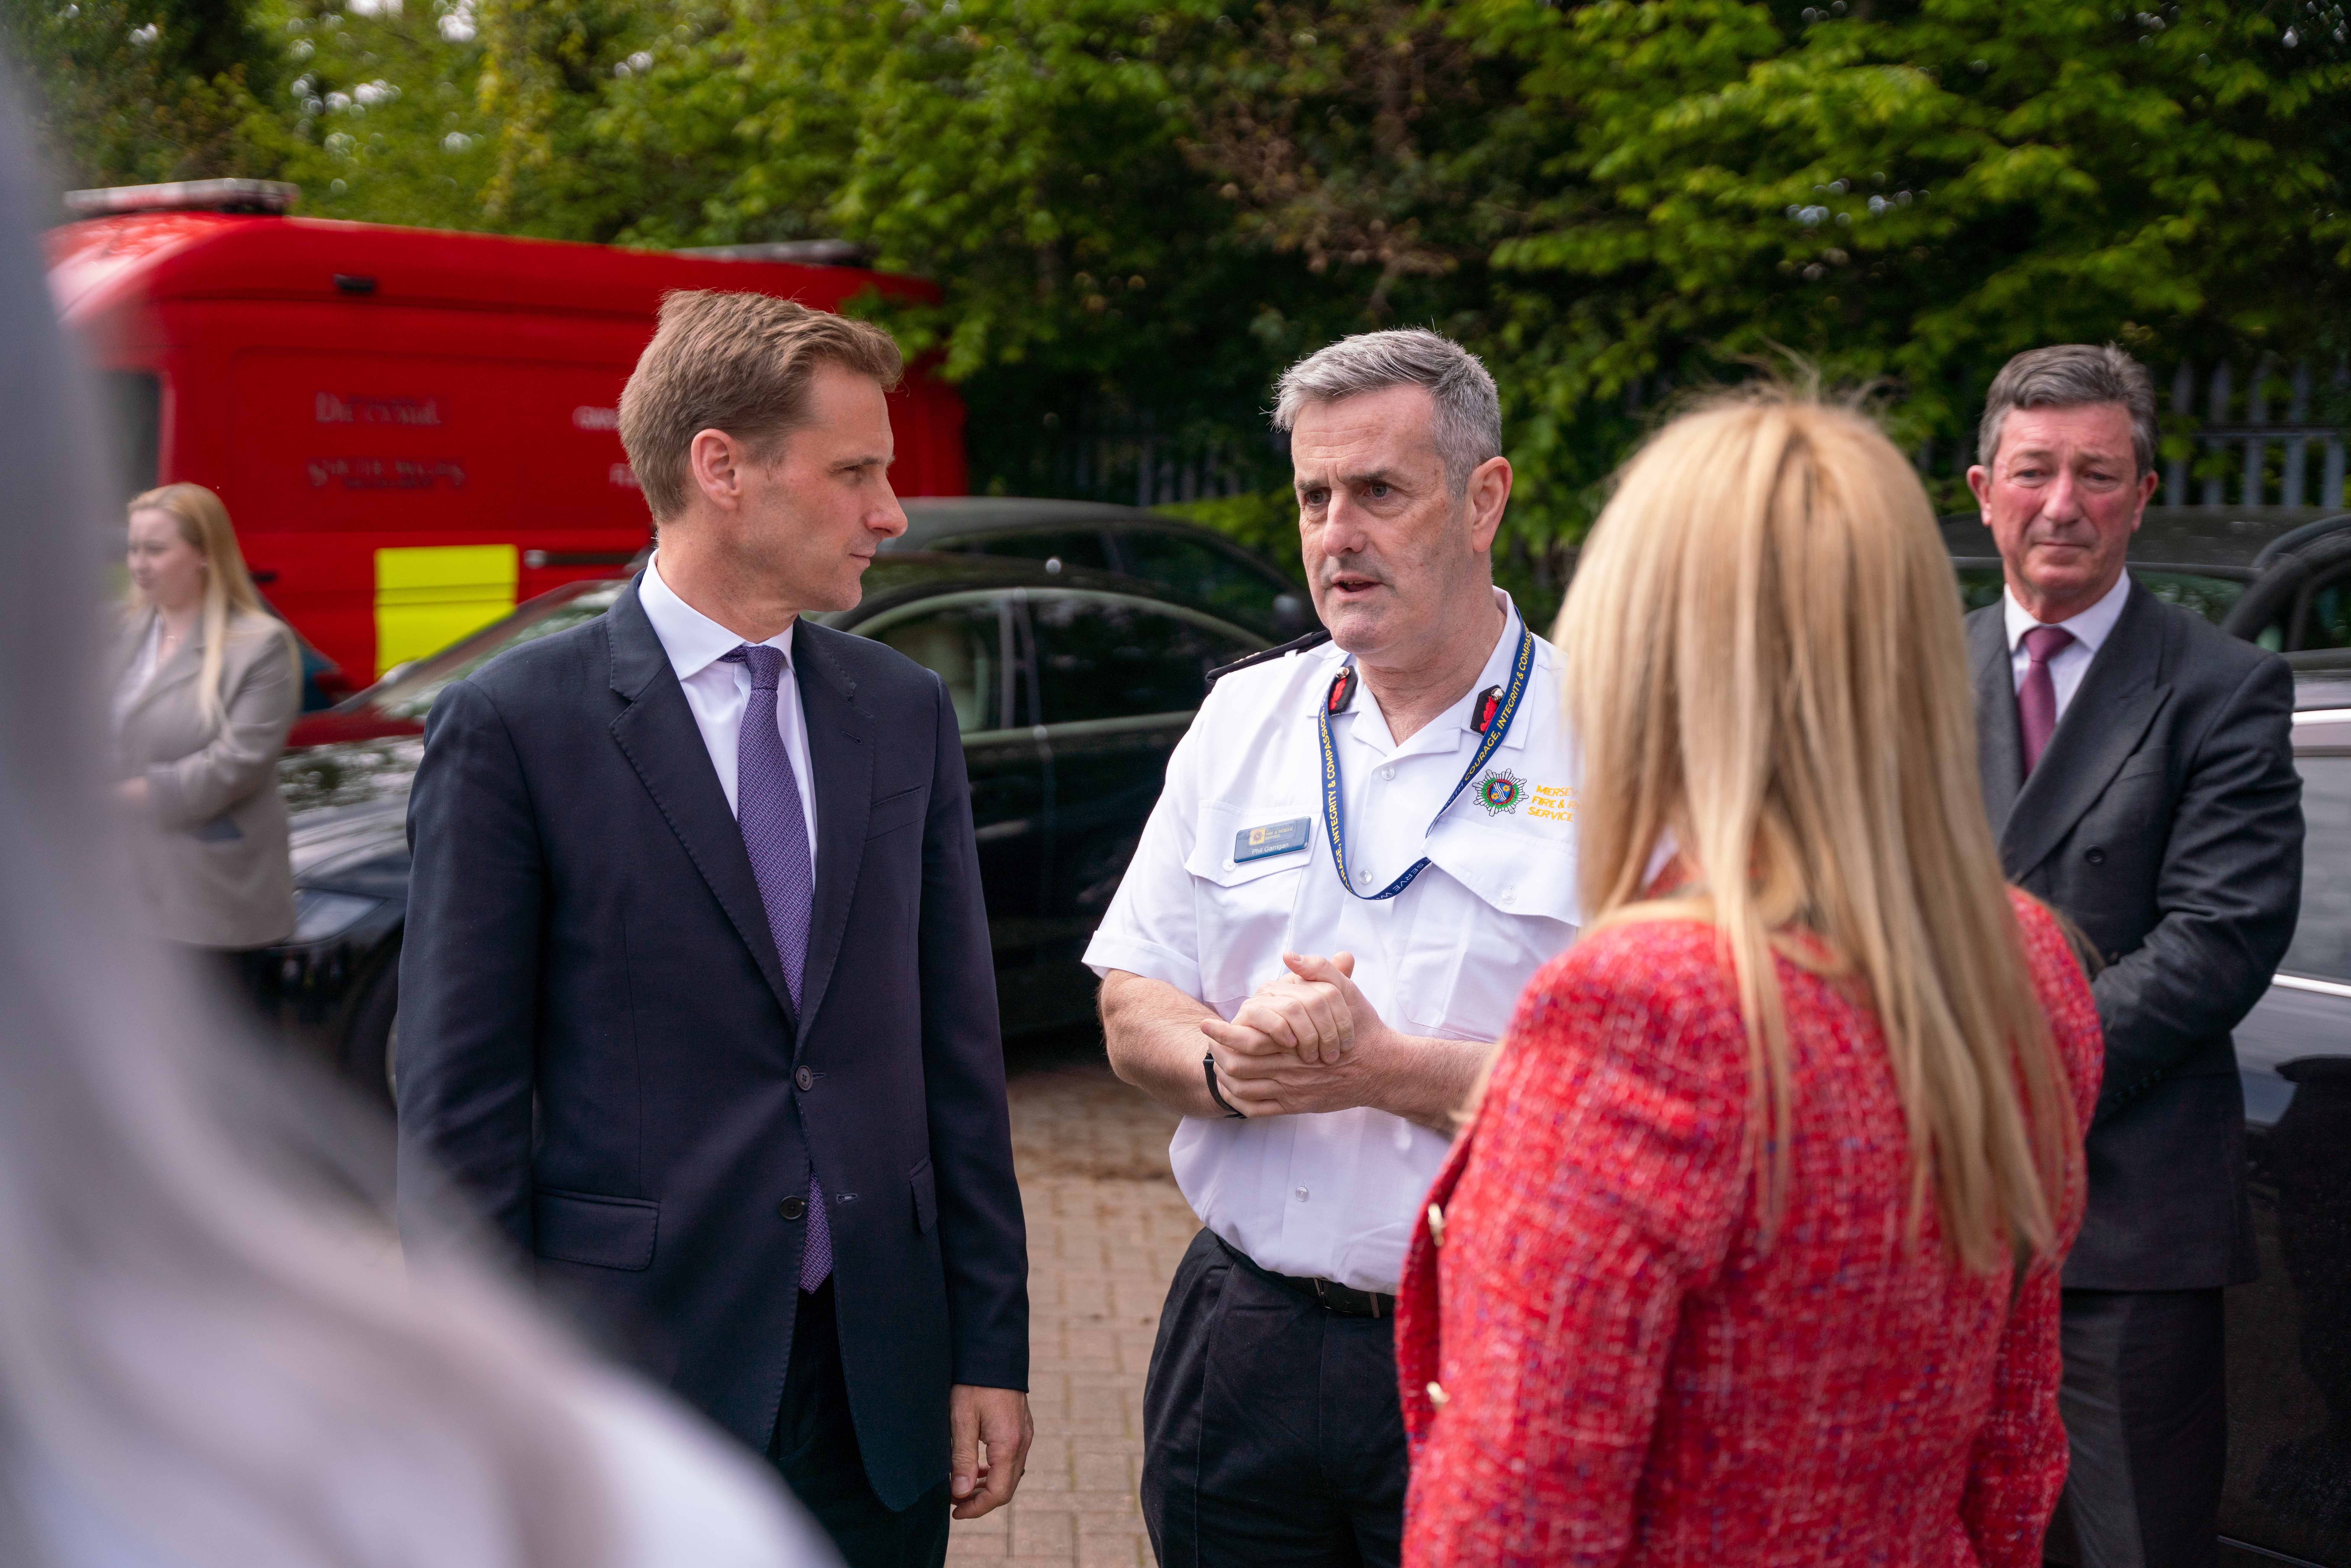 Minister for Crime, Policing and Fire, Chris Philp MP, with NFCC Vice Chair and Chief Fire Officer for Merseyside Fire and Rescue Service, Phil Garrigan.